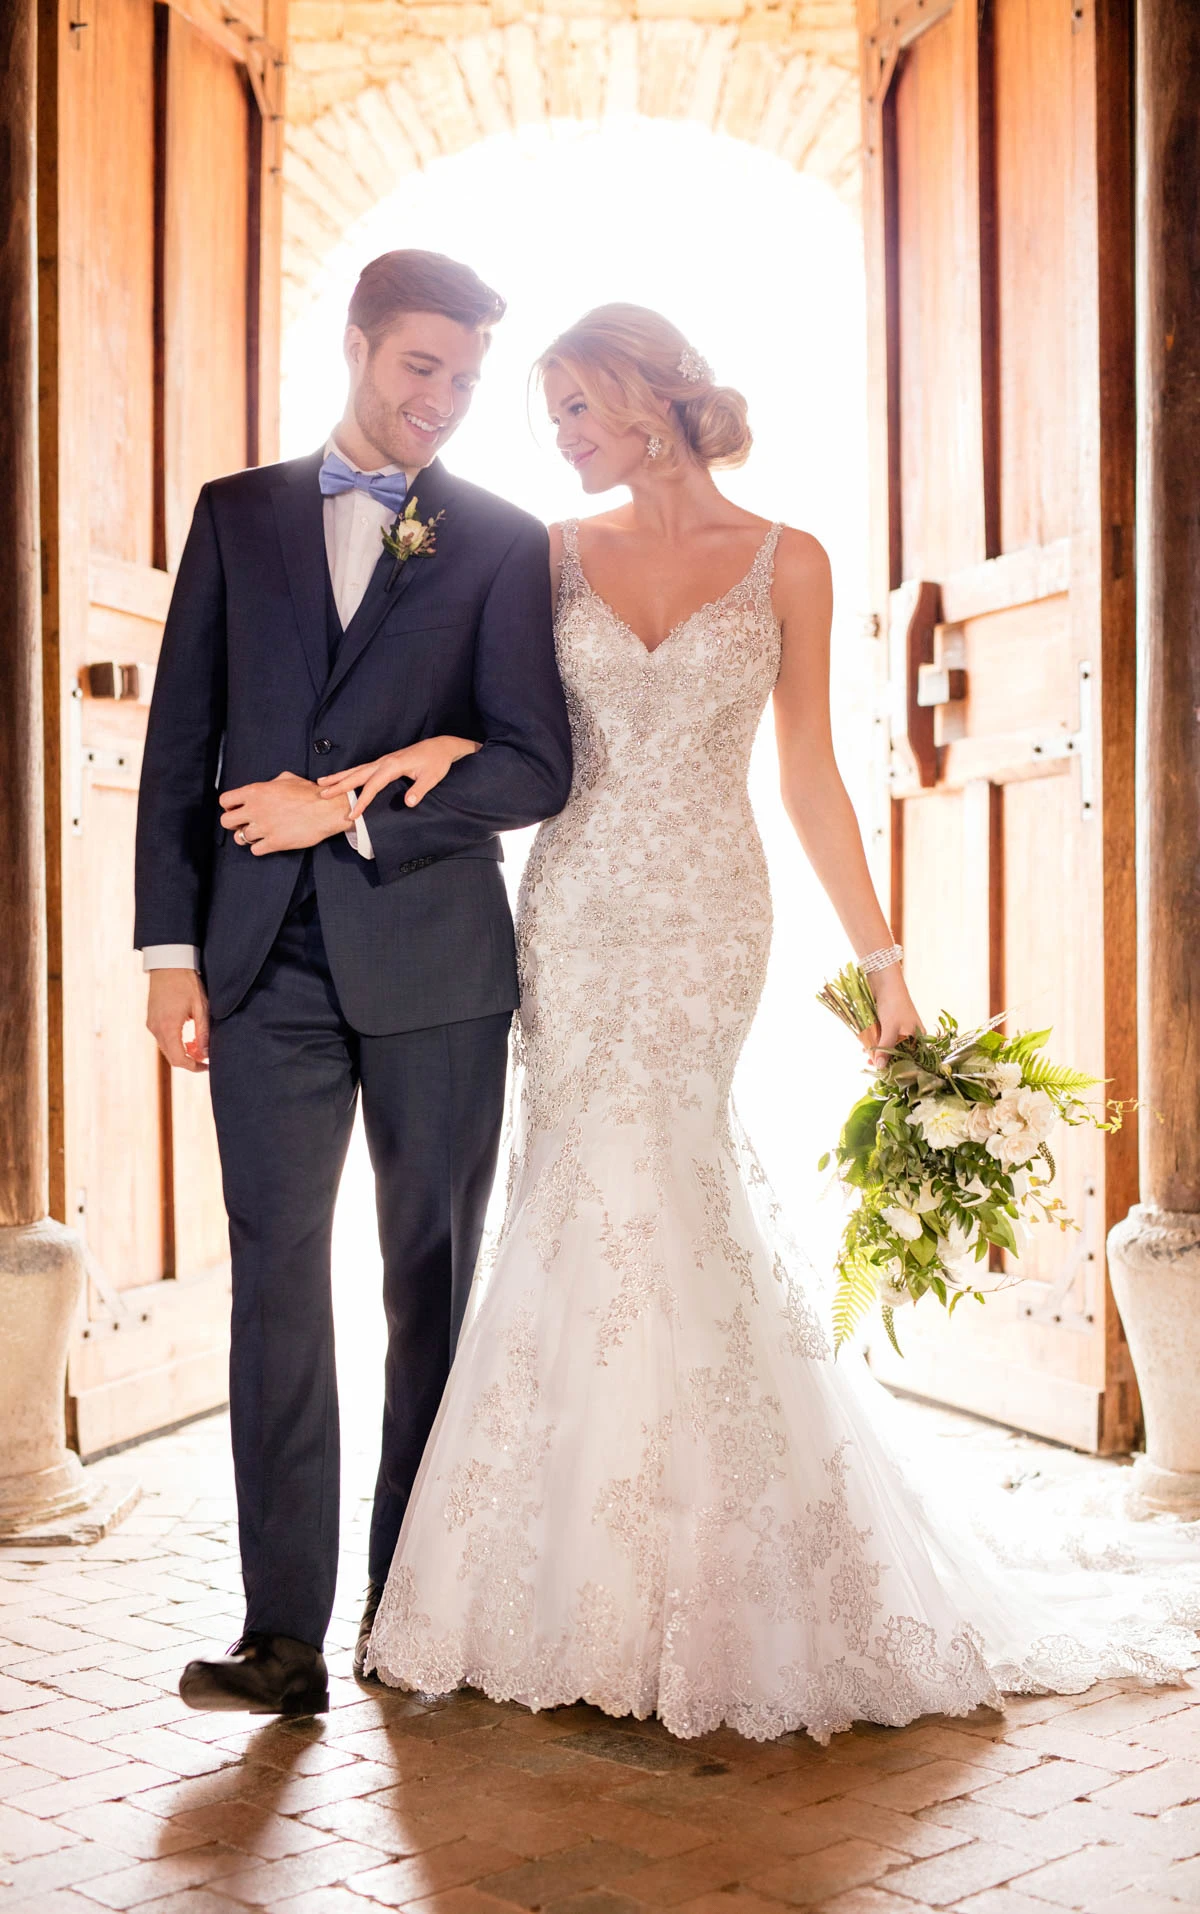 lace and pearl wedding dress